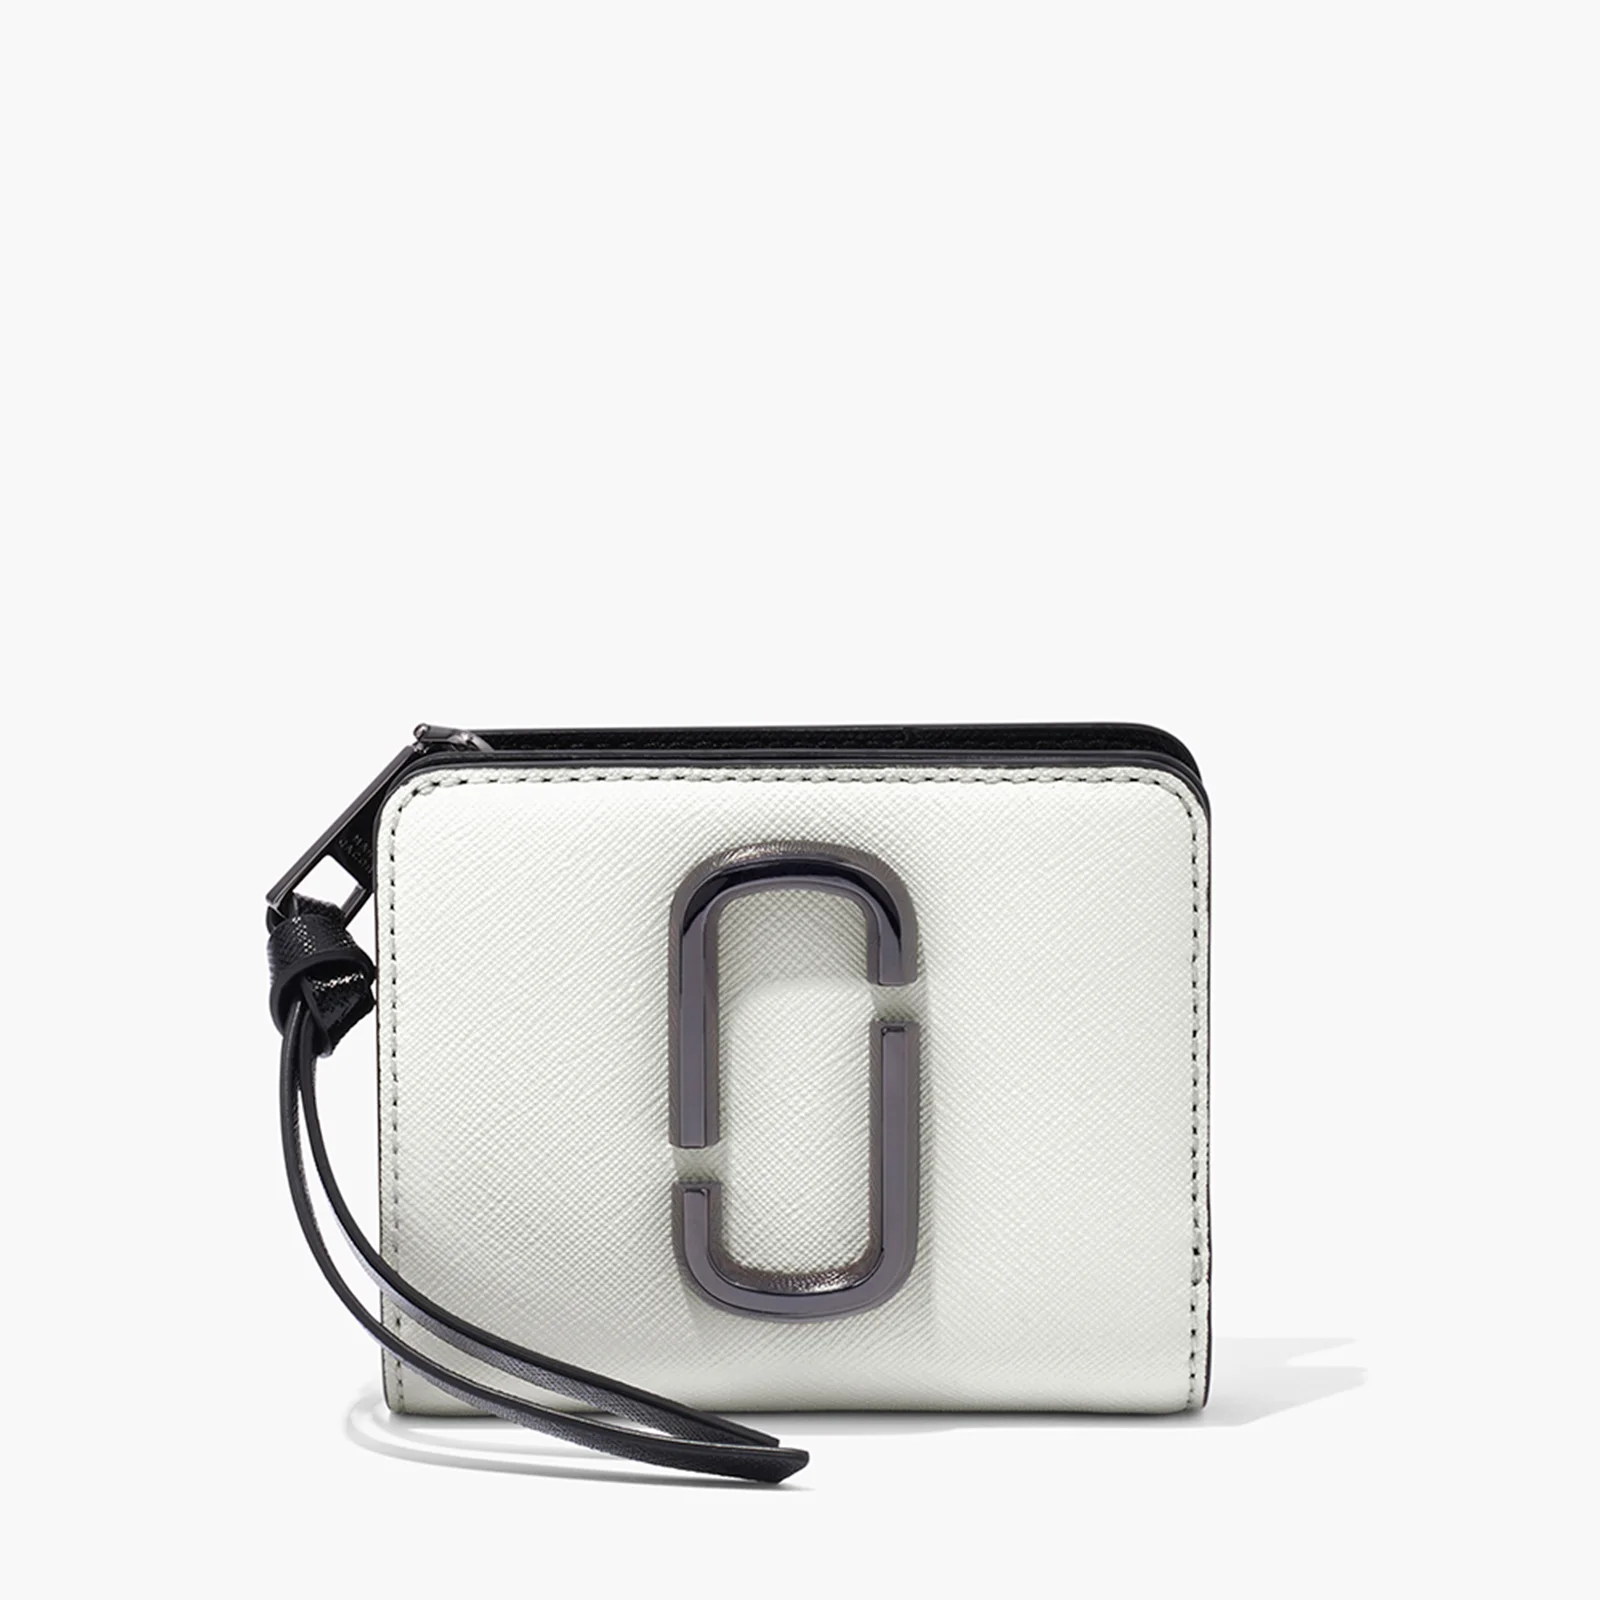 Marc Jacobs Snapshot Mini Compact Leather Wallet Image 1